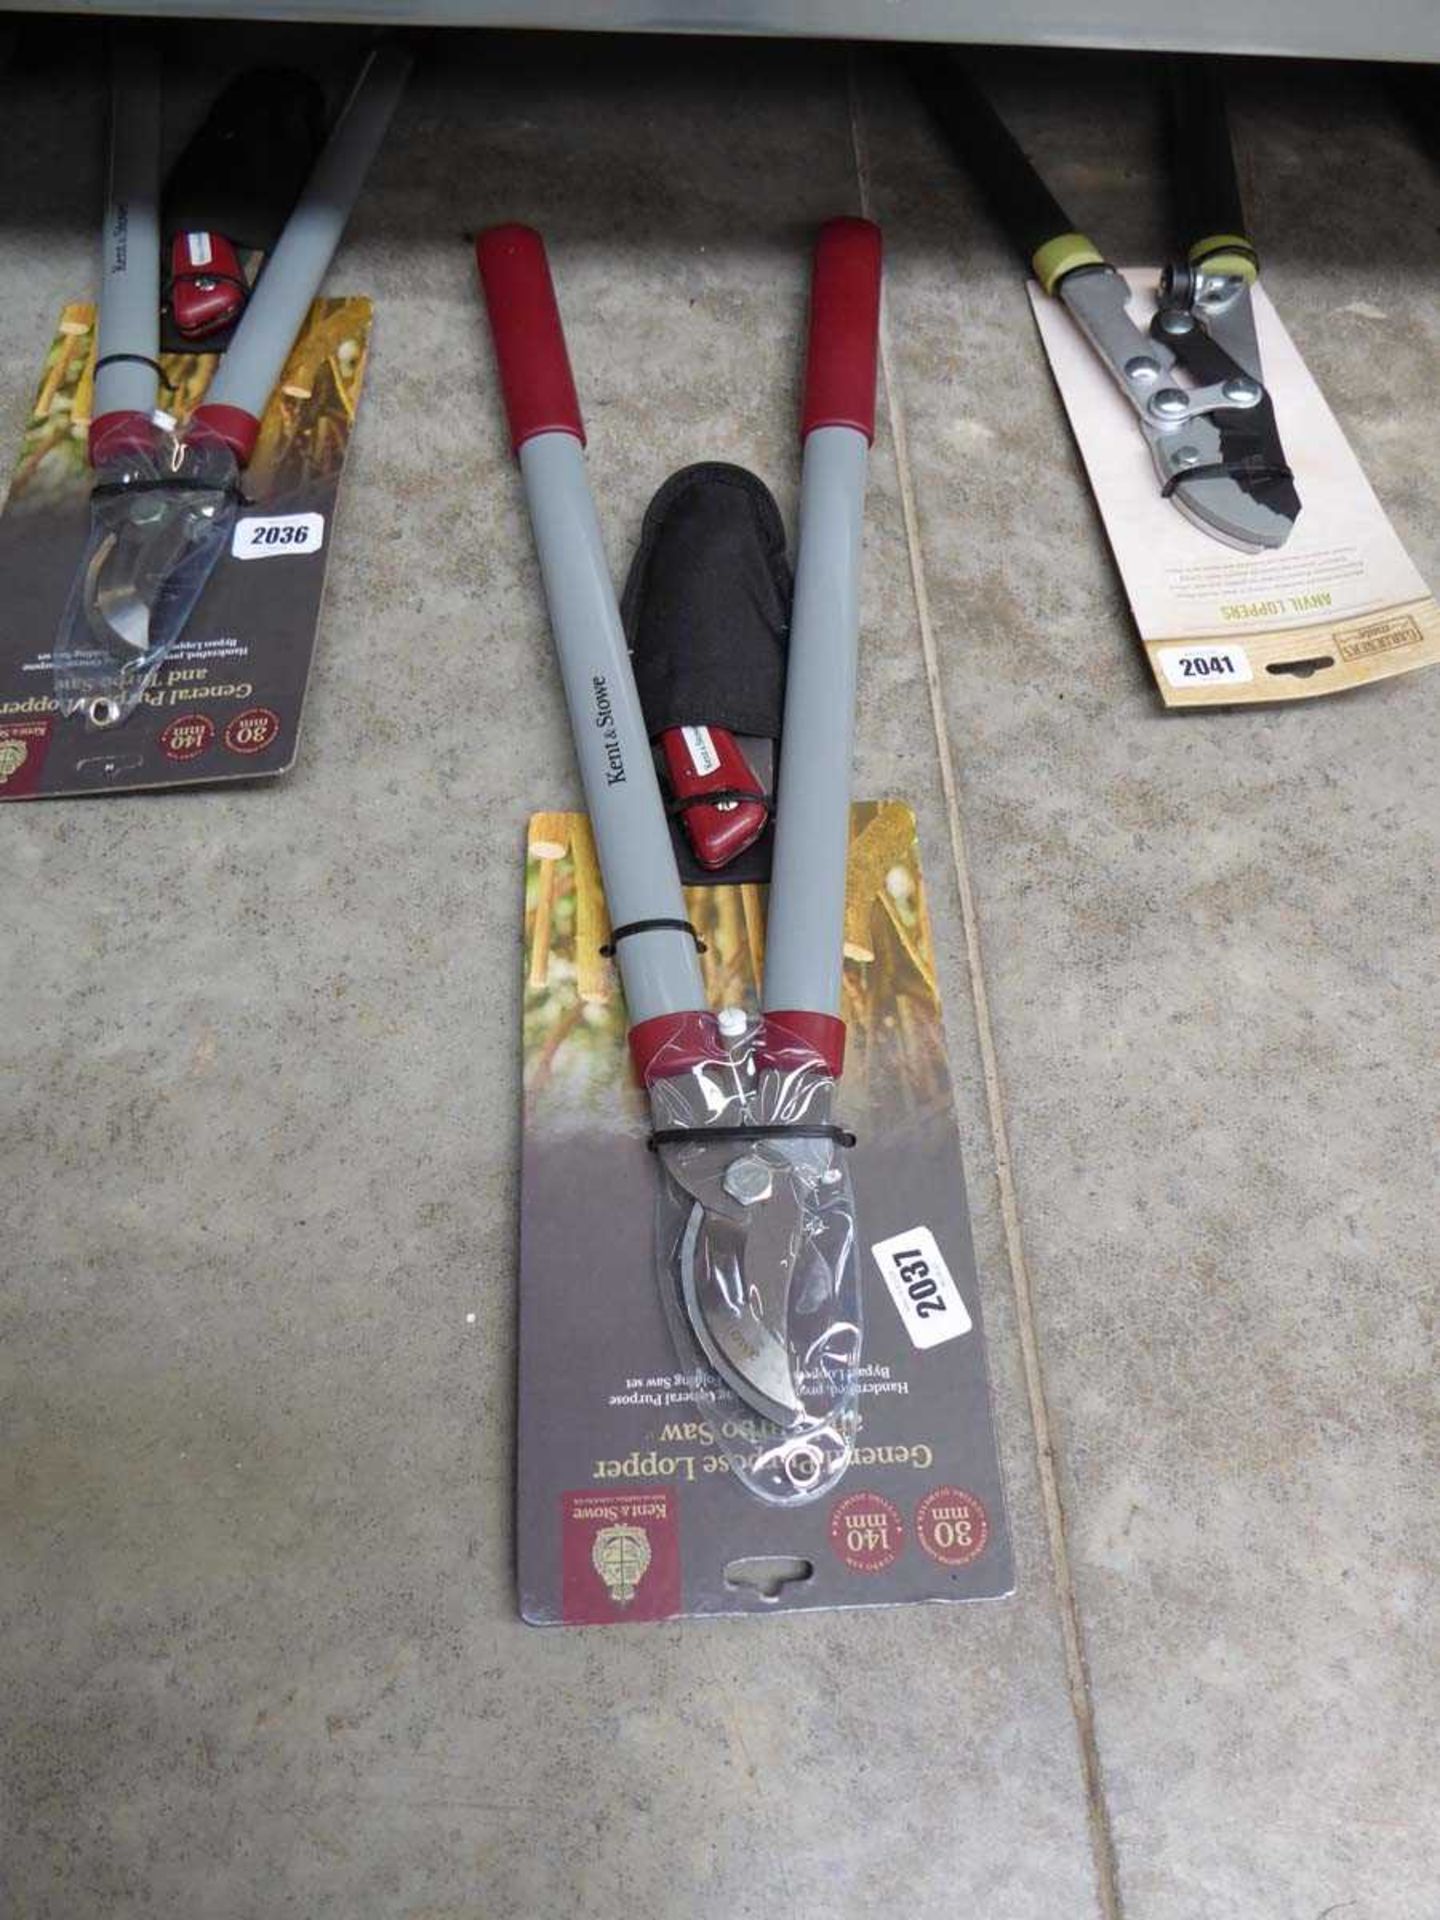 Kent & Stowe 2 piece general purpose loppers and turbo saw set